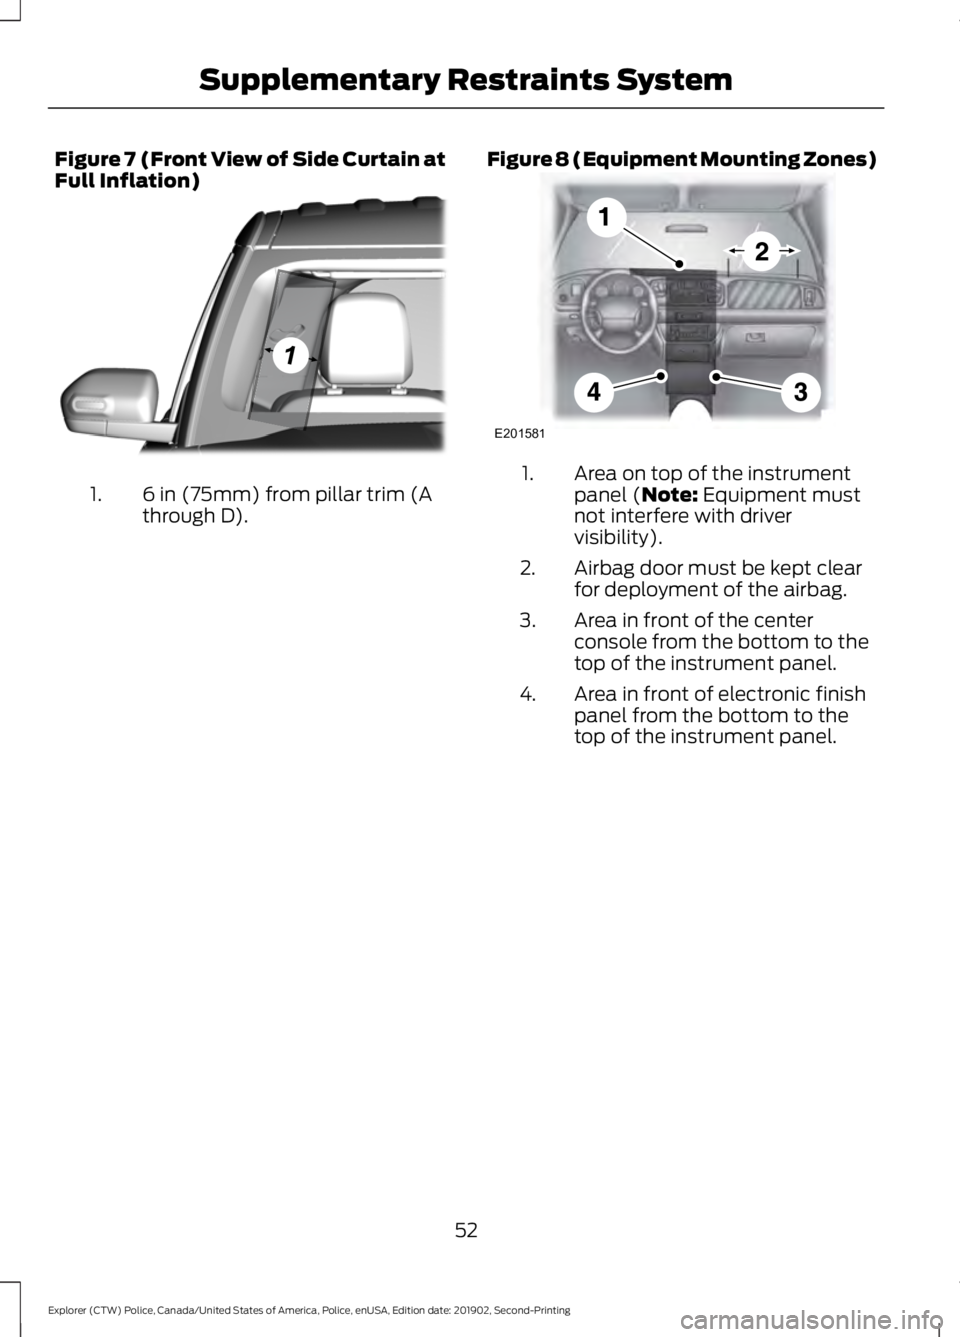 FORD POLICE INTERCEPTOR 2020  Owners Manual Figure 7 (Front View of Side Curtain at
Full Inflation)
6 in (75mm) from pillar trim (A
through D).
1. Figure 8 (Equipment Mounting Zones) Area on top of the instrument
panel (Note: Equipment must
not